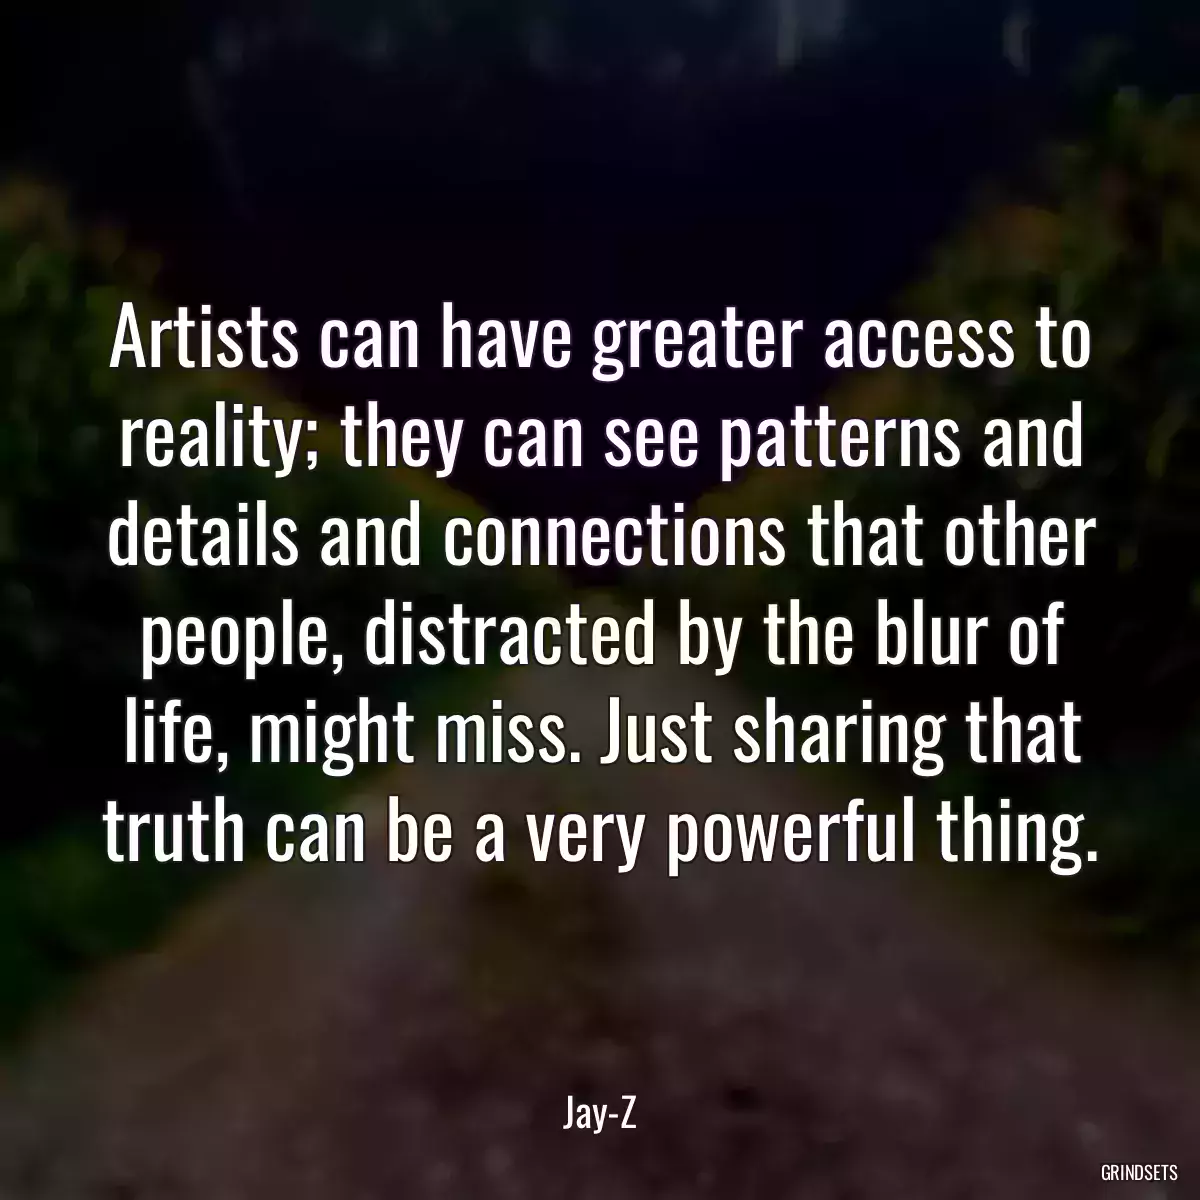 Artists can have greater access to reality; they can see patterns and details and connections that other people, distracted by the blur of life, might miss. Just sharing that truth can be a very powerful thing.